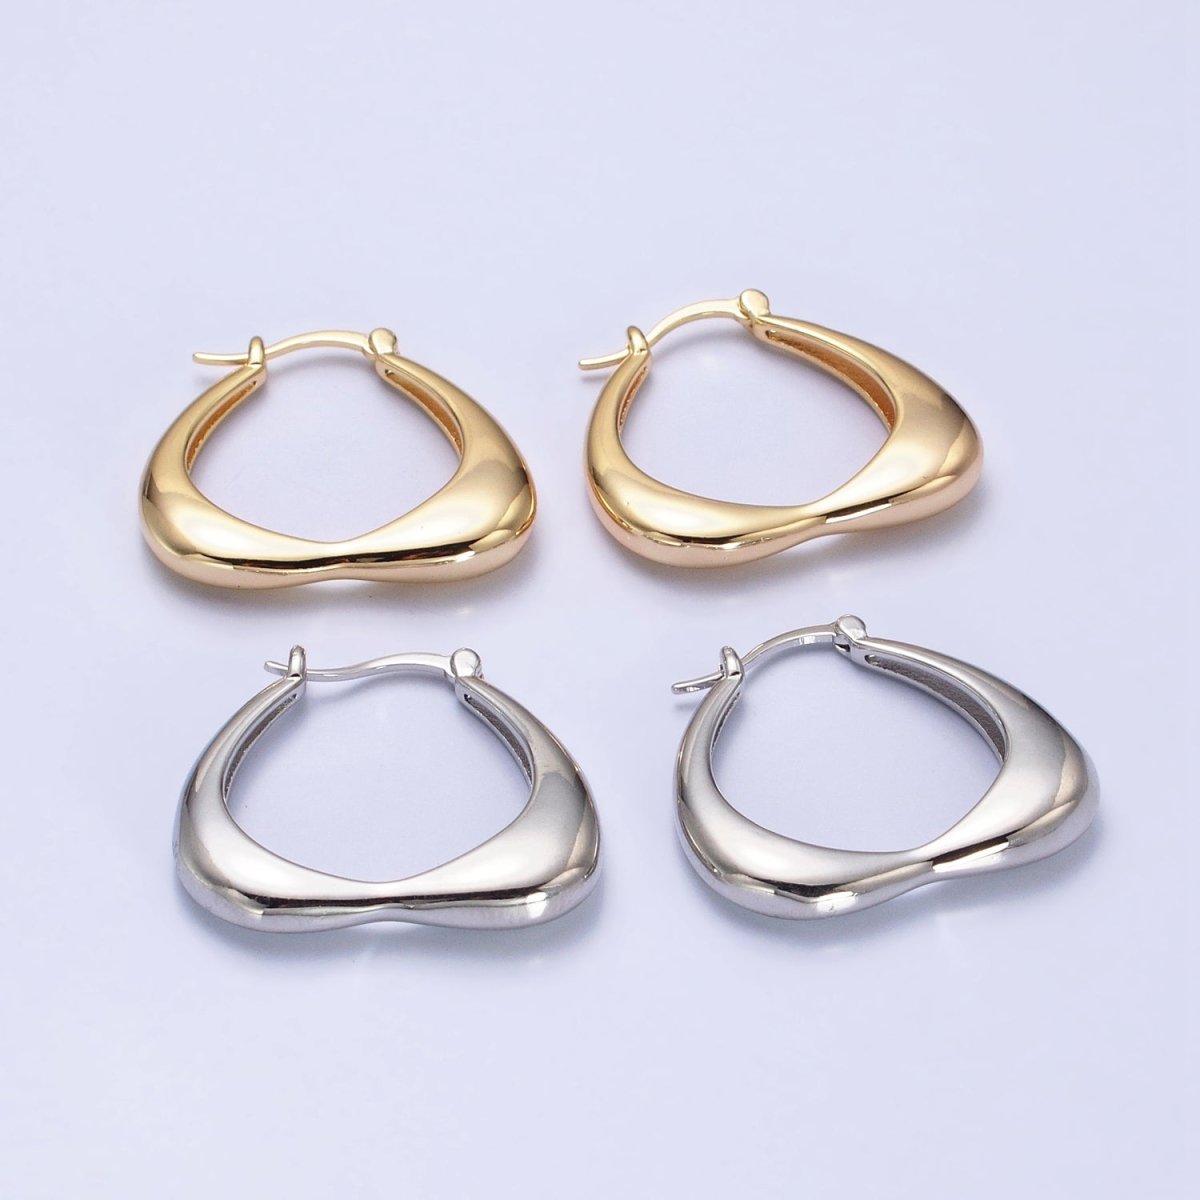 Gold, Silver Geometric Abstract Triangle Statement Latch Earrings | AB543 AB544 - DLUXCA